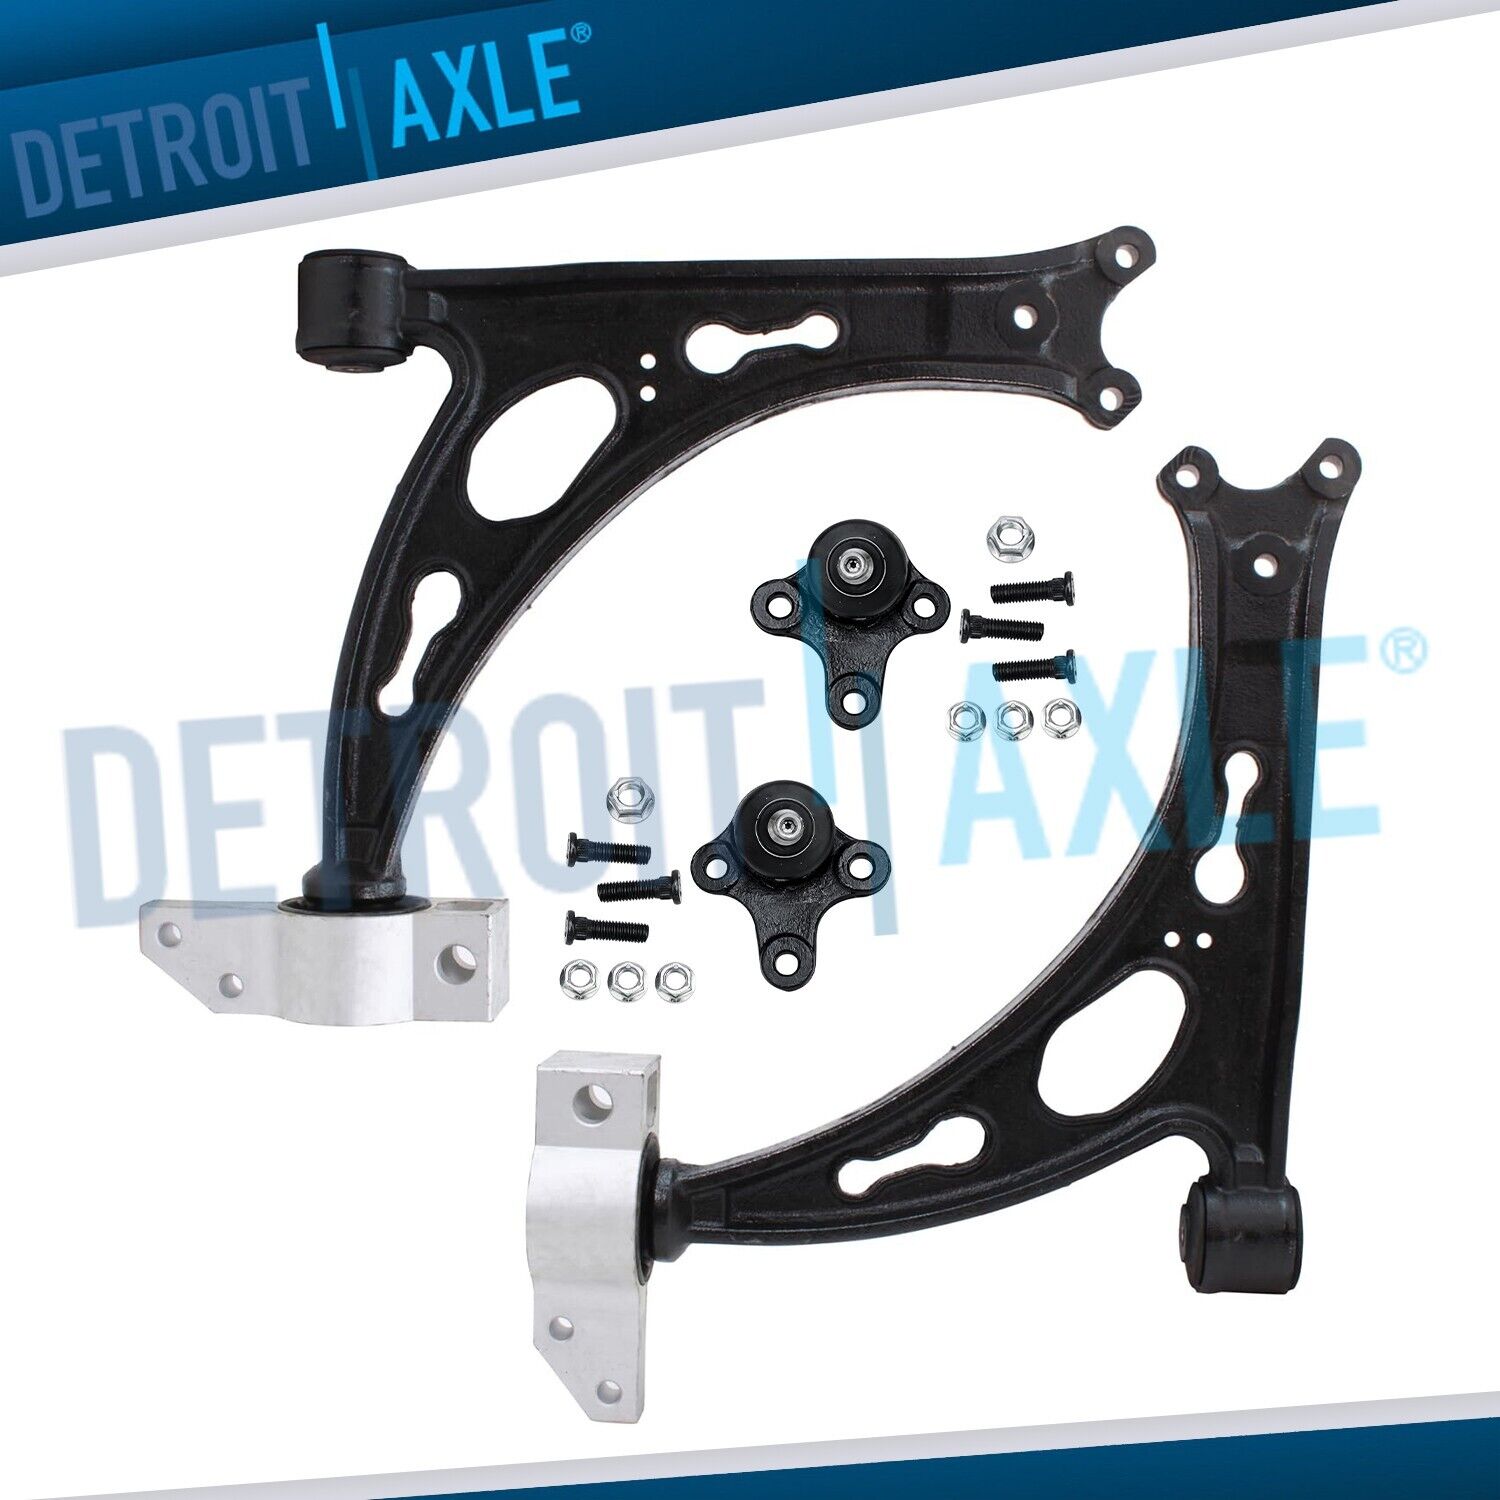 Both (2) Front Lower Control Arms w/Ball Joints for 2005-2013 Audi A3 VW Jetta